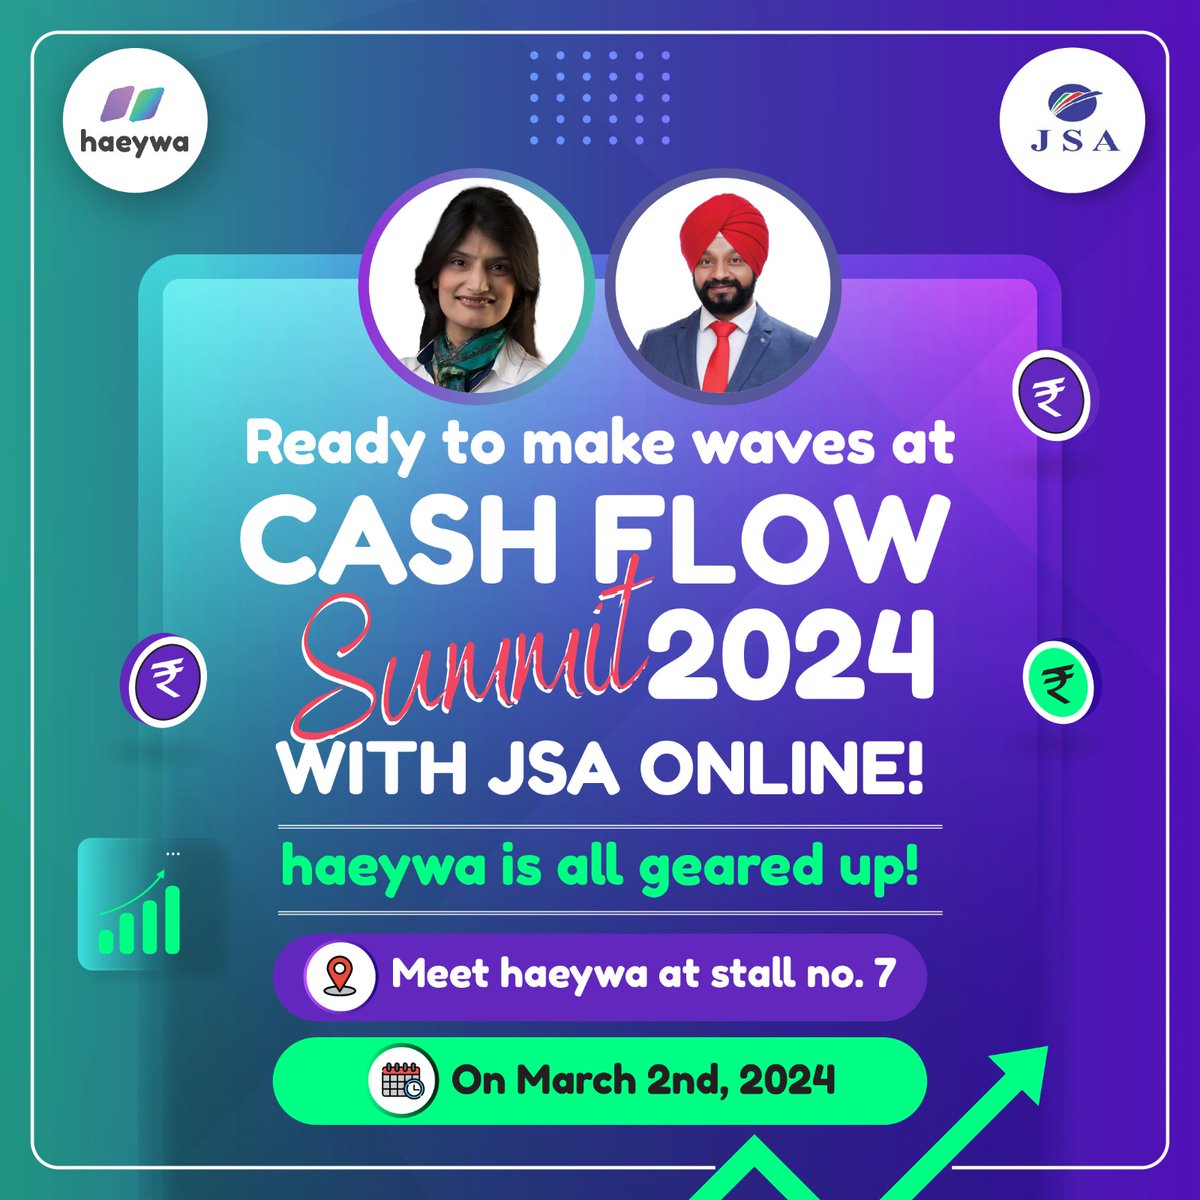 Join the excitement at Cash Flow Summit 2024 with haeywa! Dive into innovative strategies alongside 750+ business owners. Don't miss out – meet us at stall number 7 for a firsthand experience!

To Register: bit.ly/Shilpa-CashFlo… 

#CashFlowSummit2024 #JSAOnline #haeywaImpact